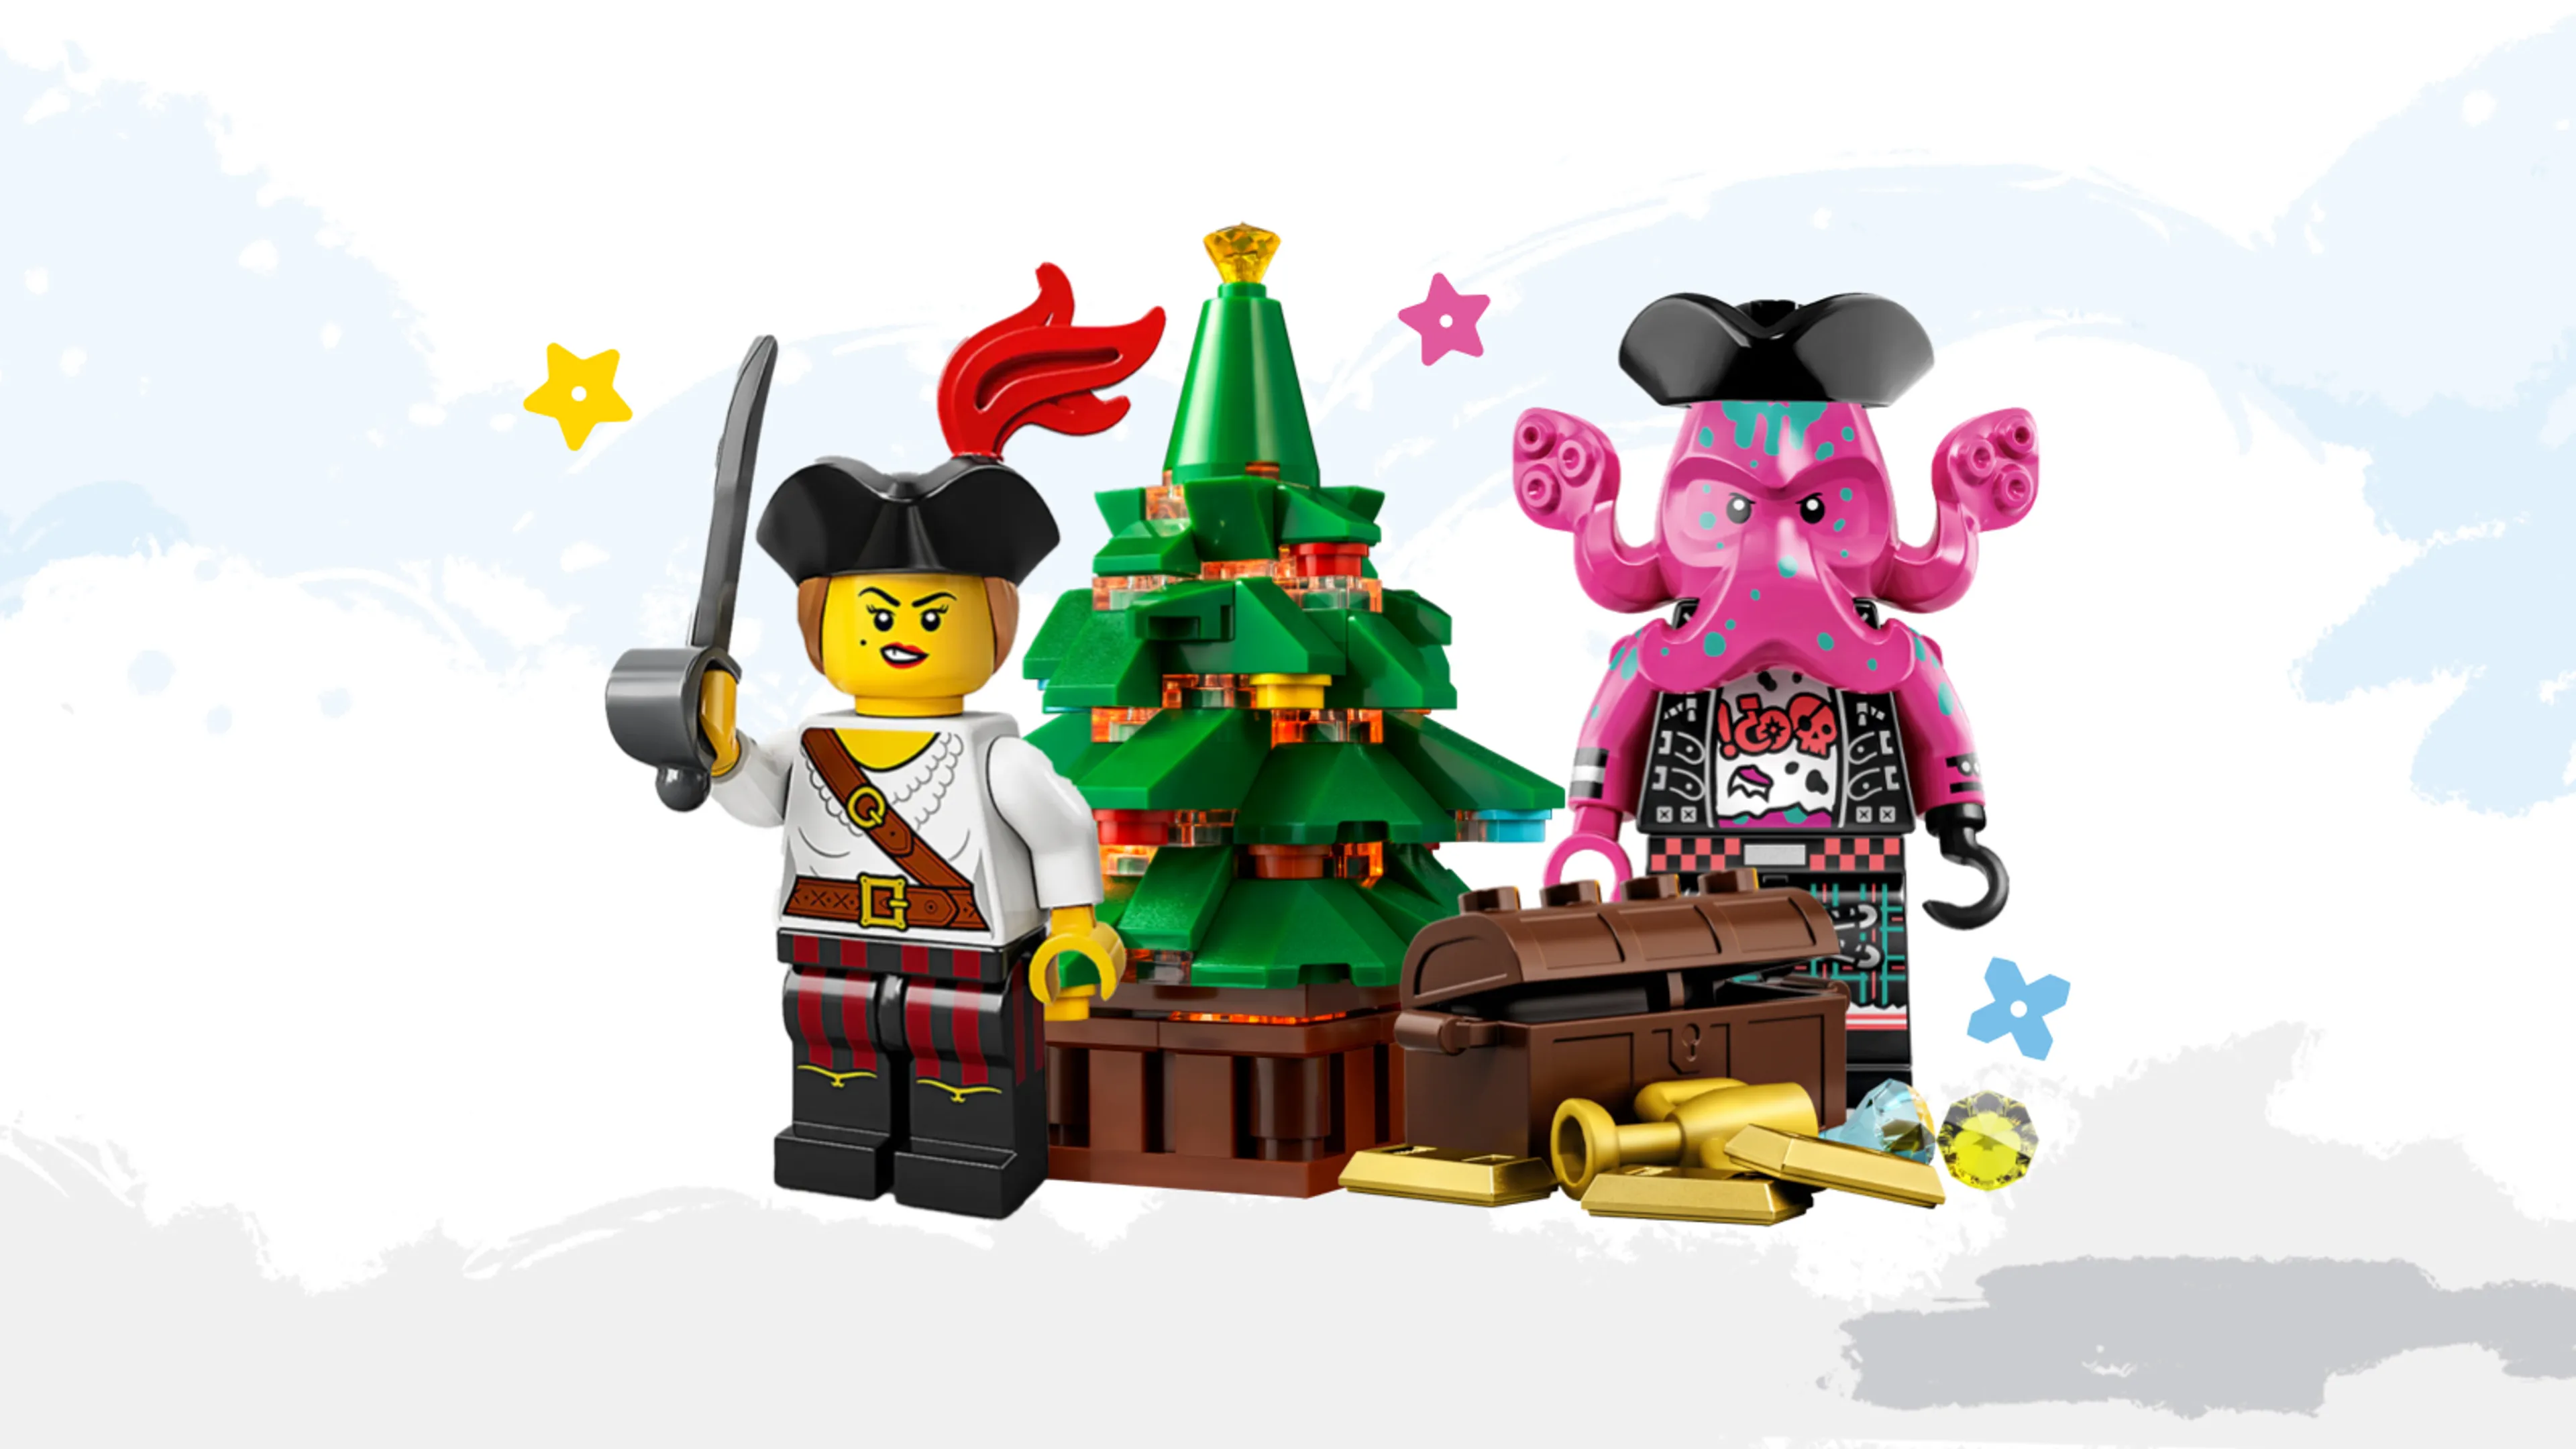 A pirate and octopus-face minifigure with a holiday tree